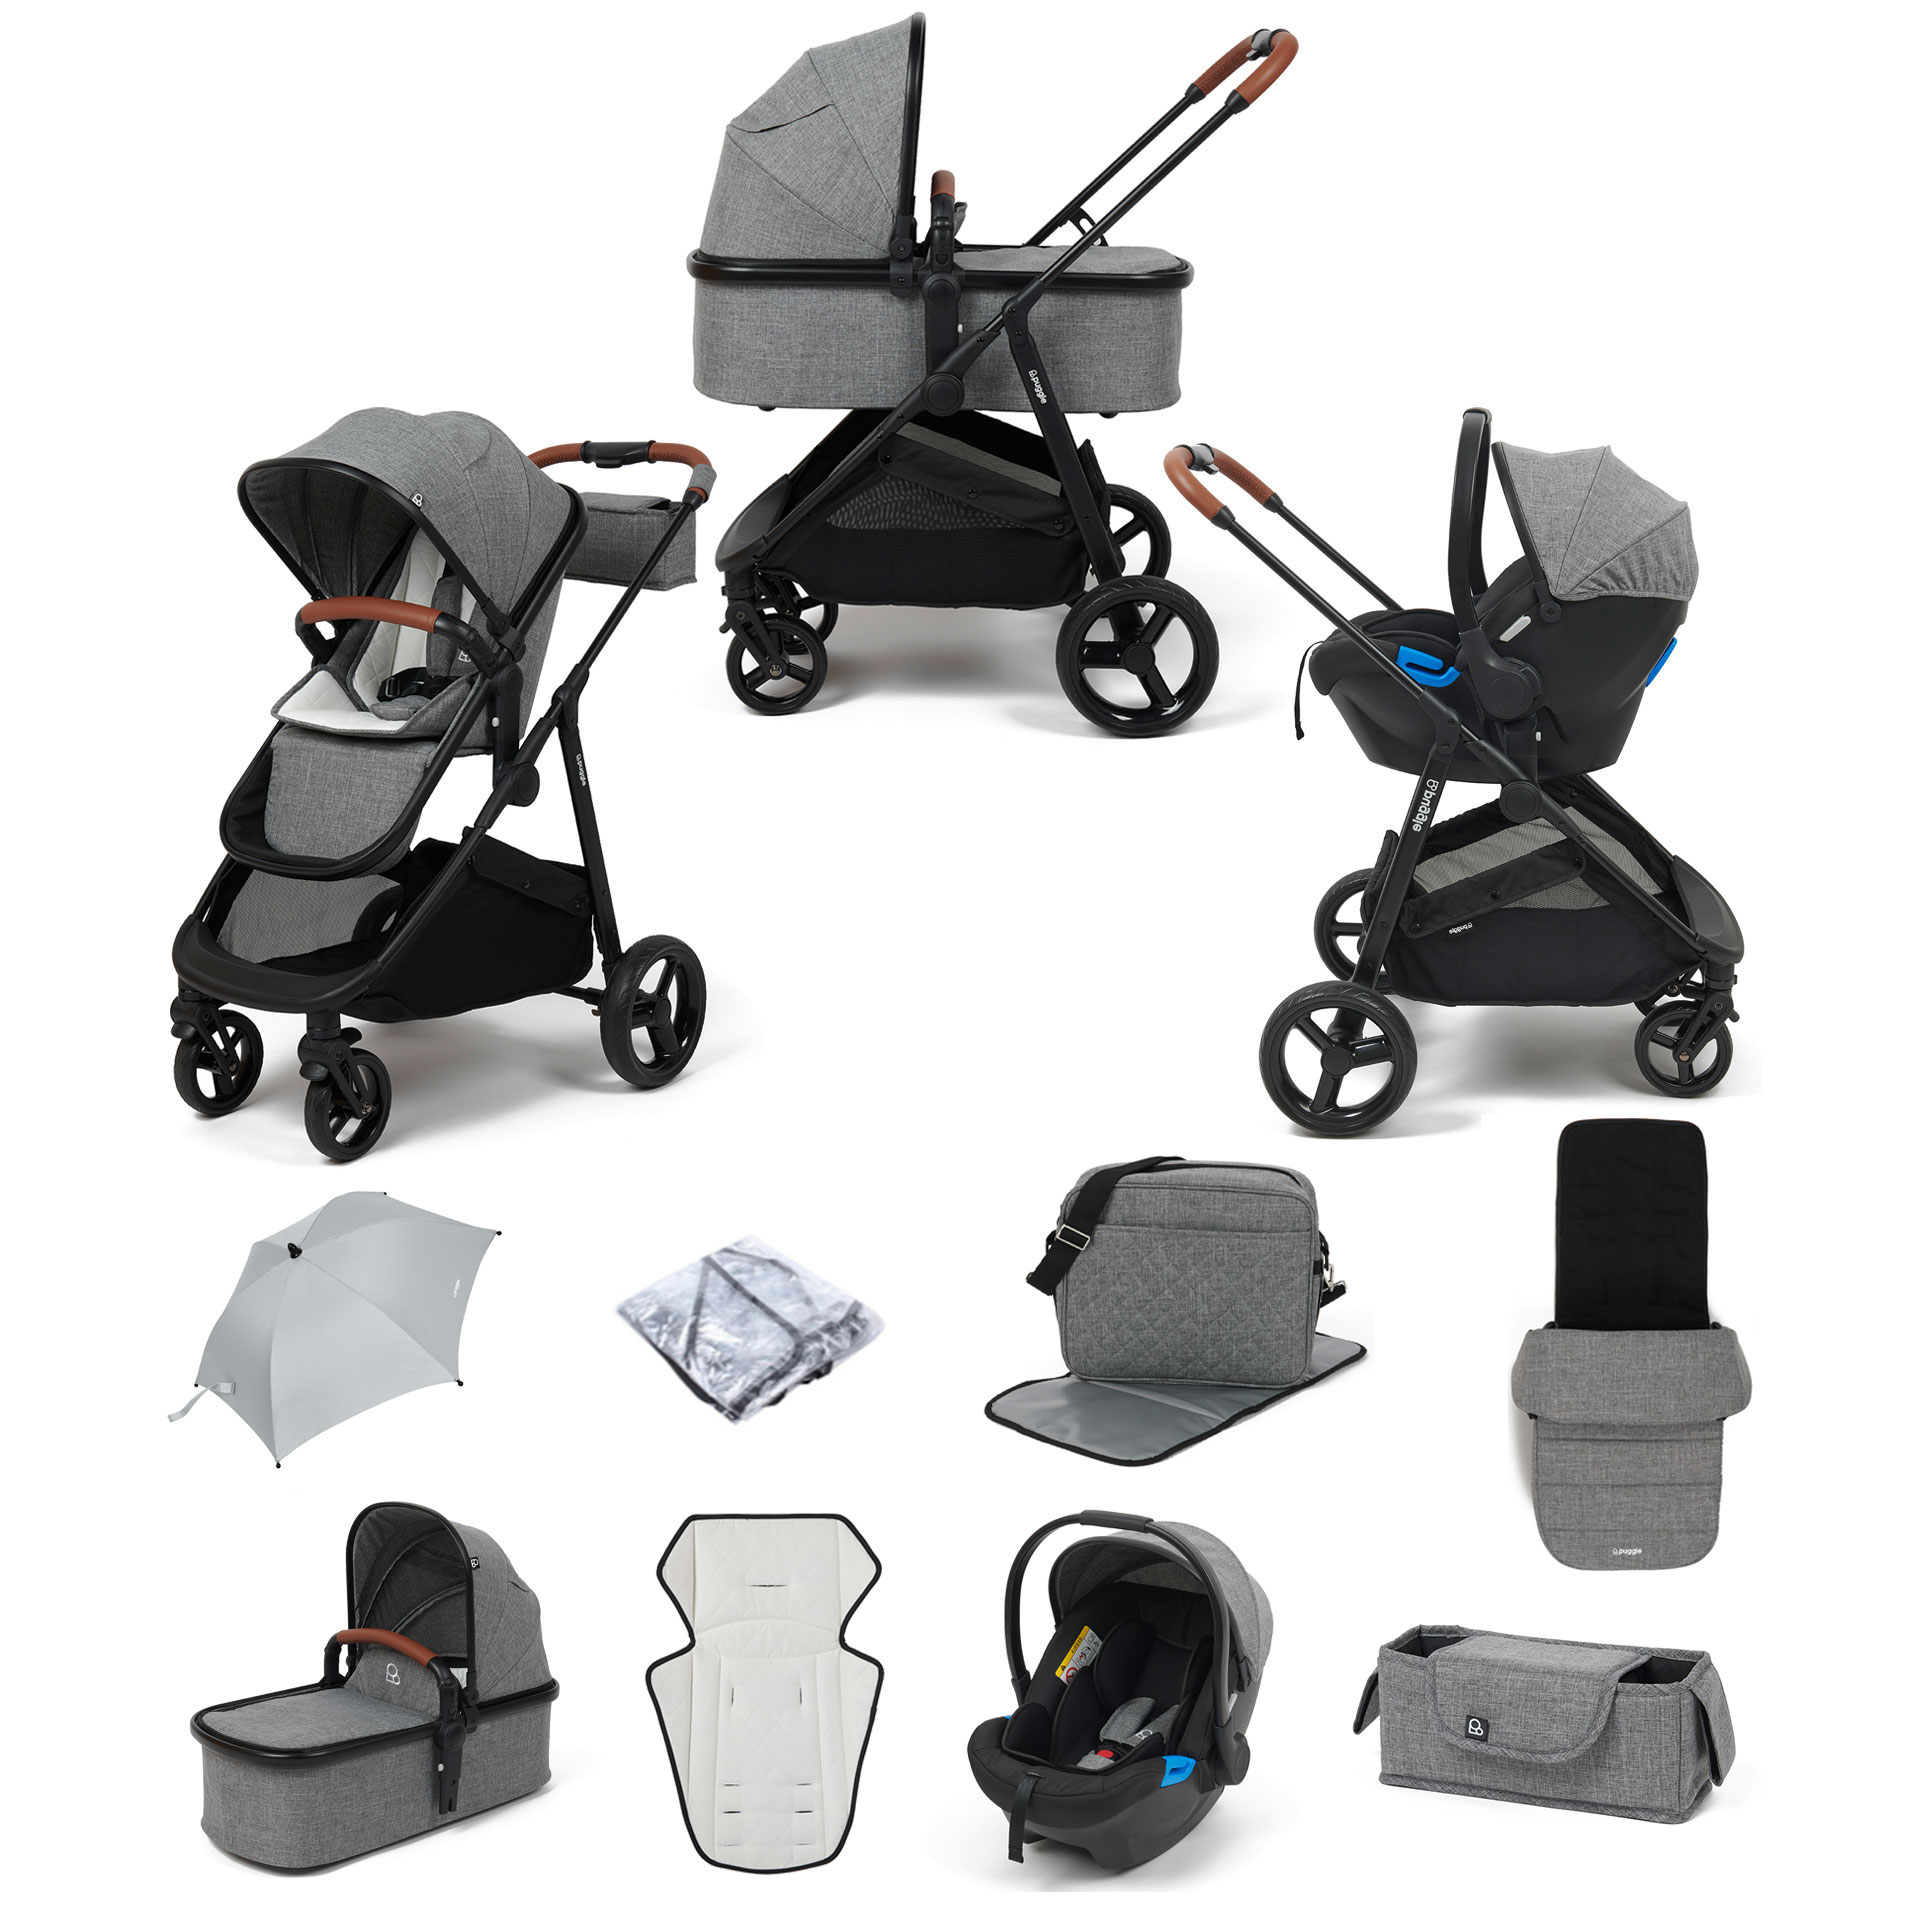 Puggle Monaco XT 3in1 Travel System with Organiser, Parasol, Footmuff & Changing Bag - Graphite Grey